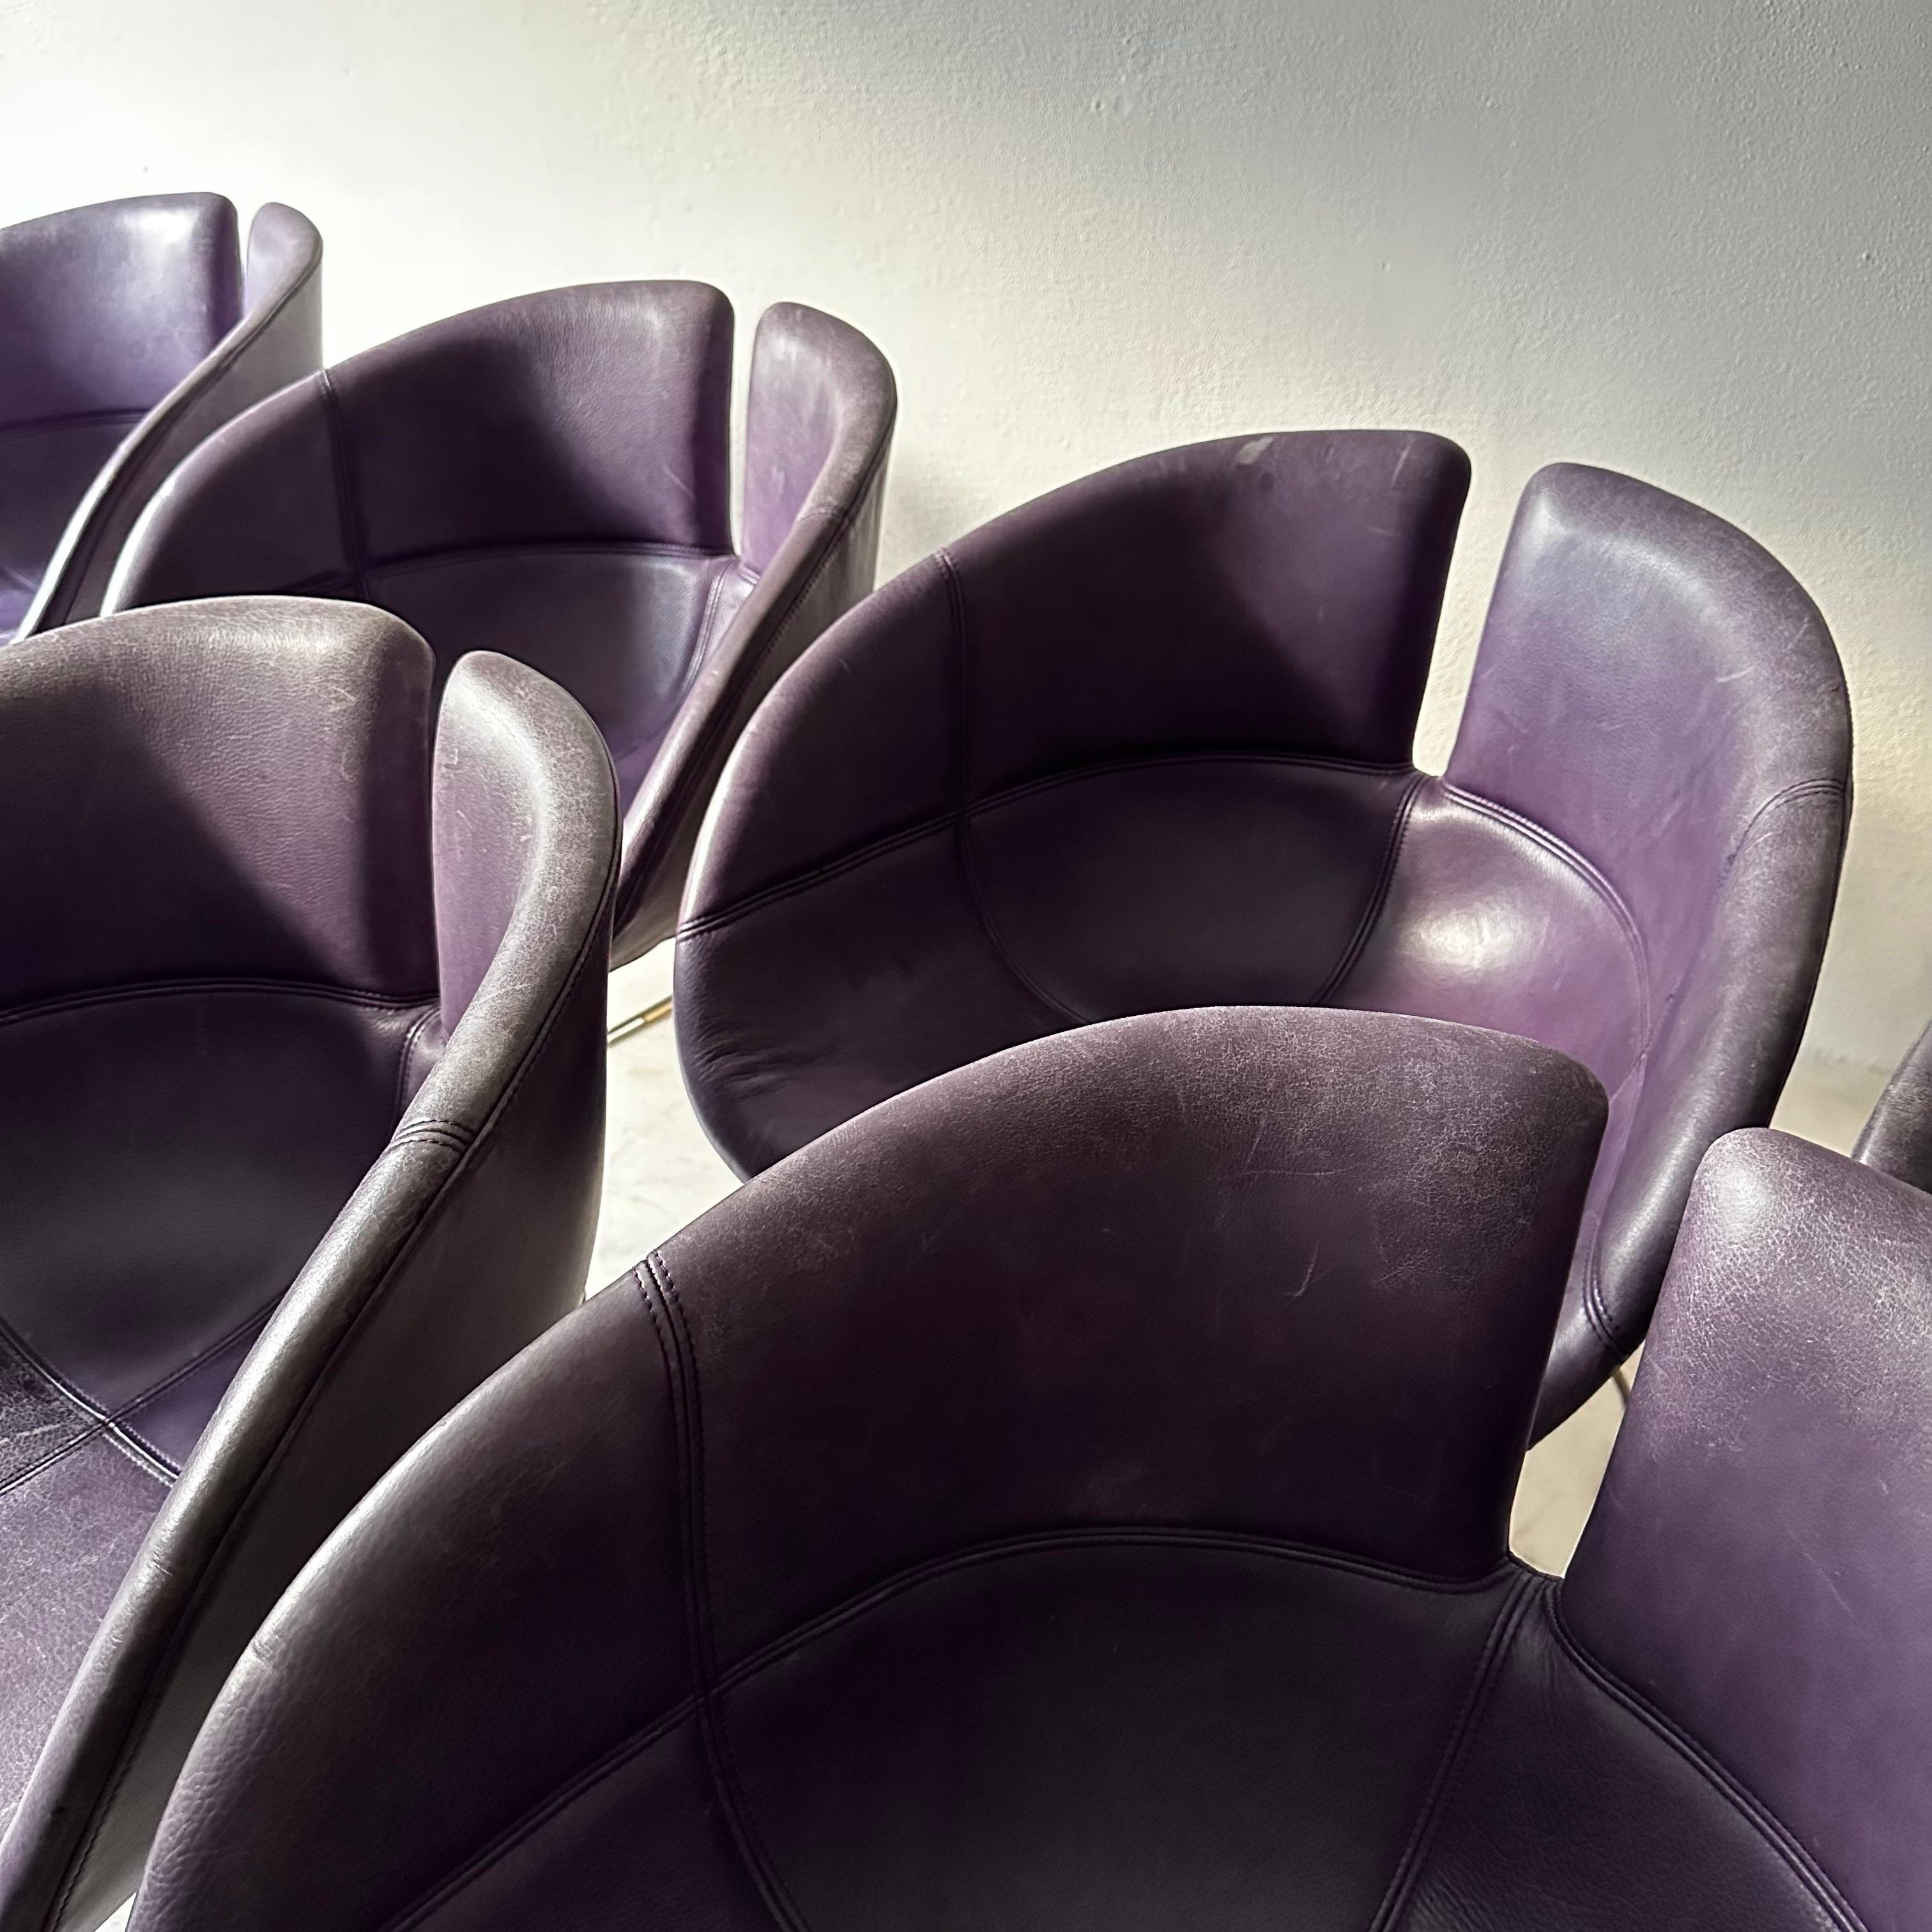 Stainless Steel Set of 12 Moroso Dining Chairs in Purple Leather by Patricia Urquiola 2002 For Sale